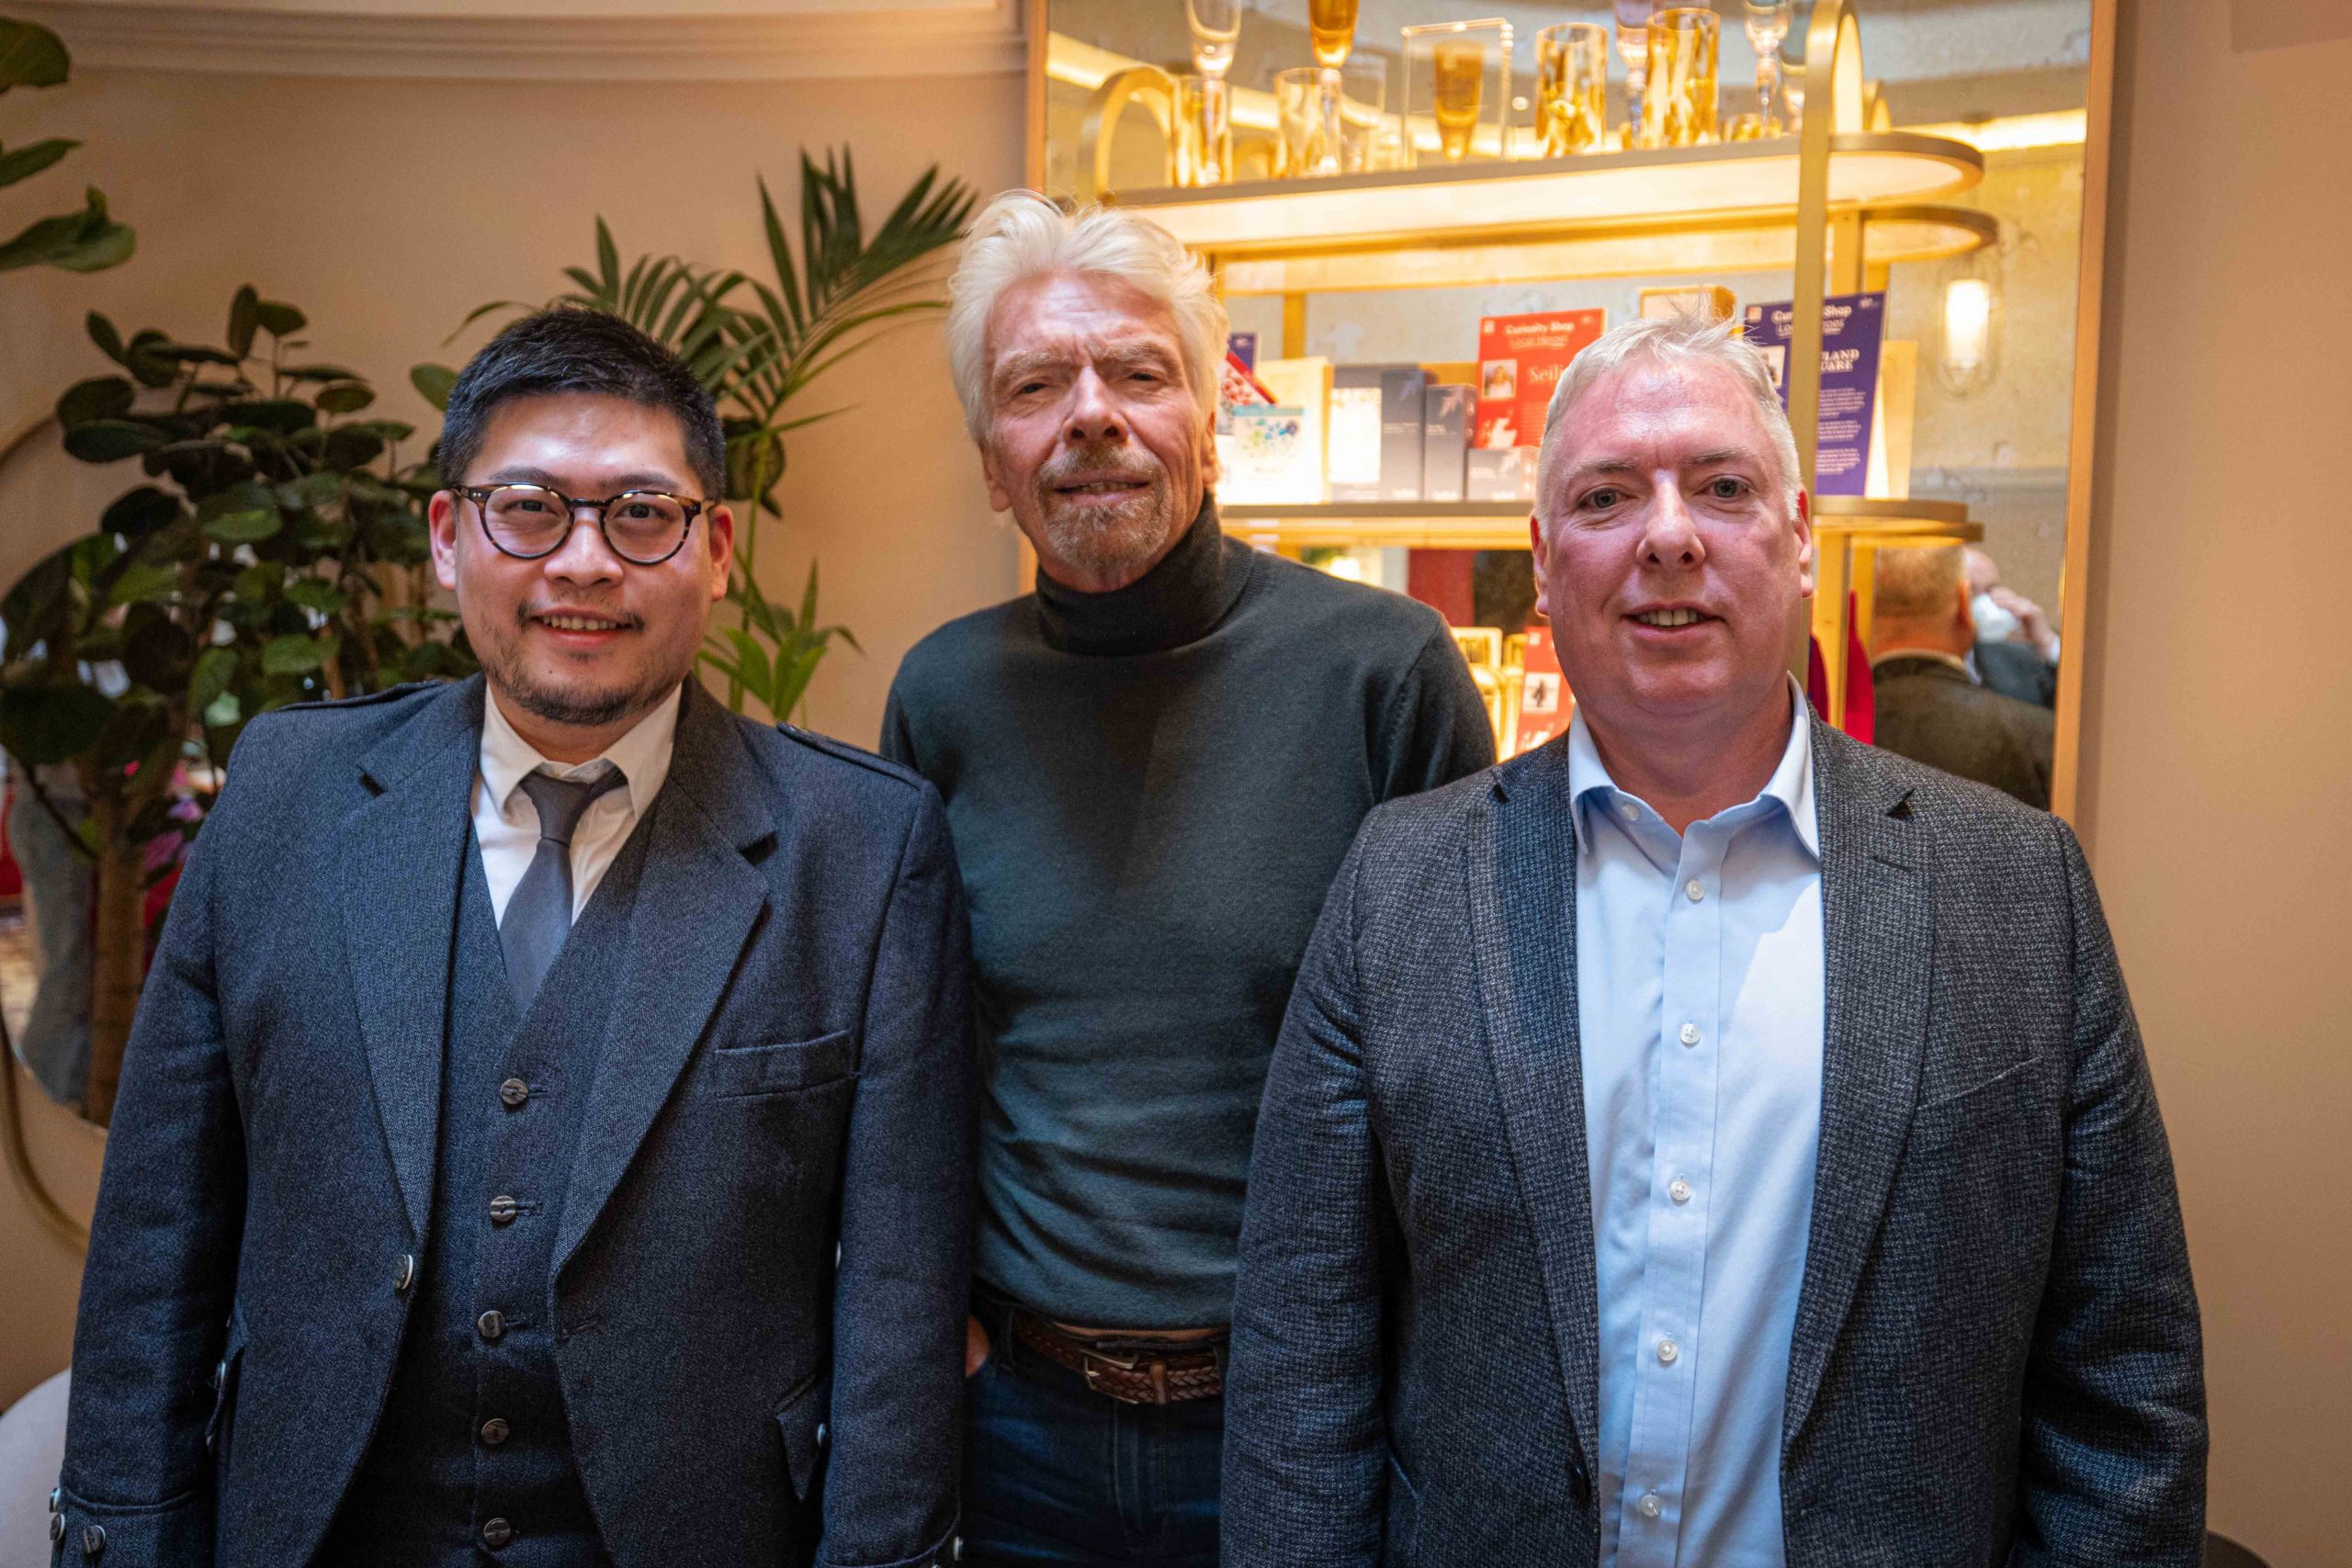 Founders of Project Harmless with Richard Branson.